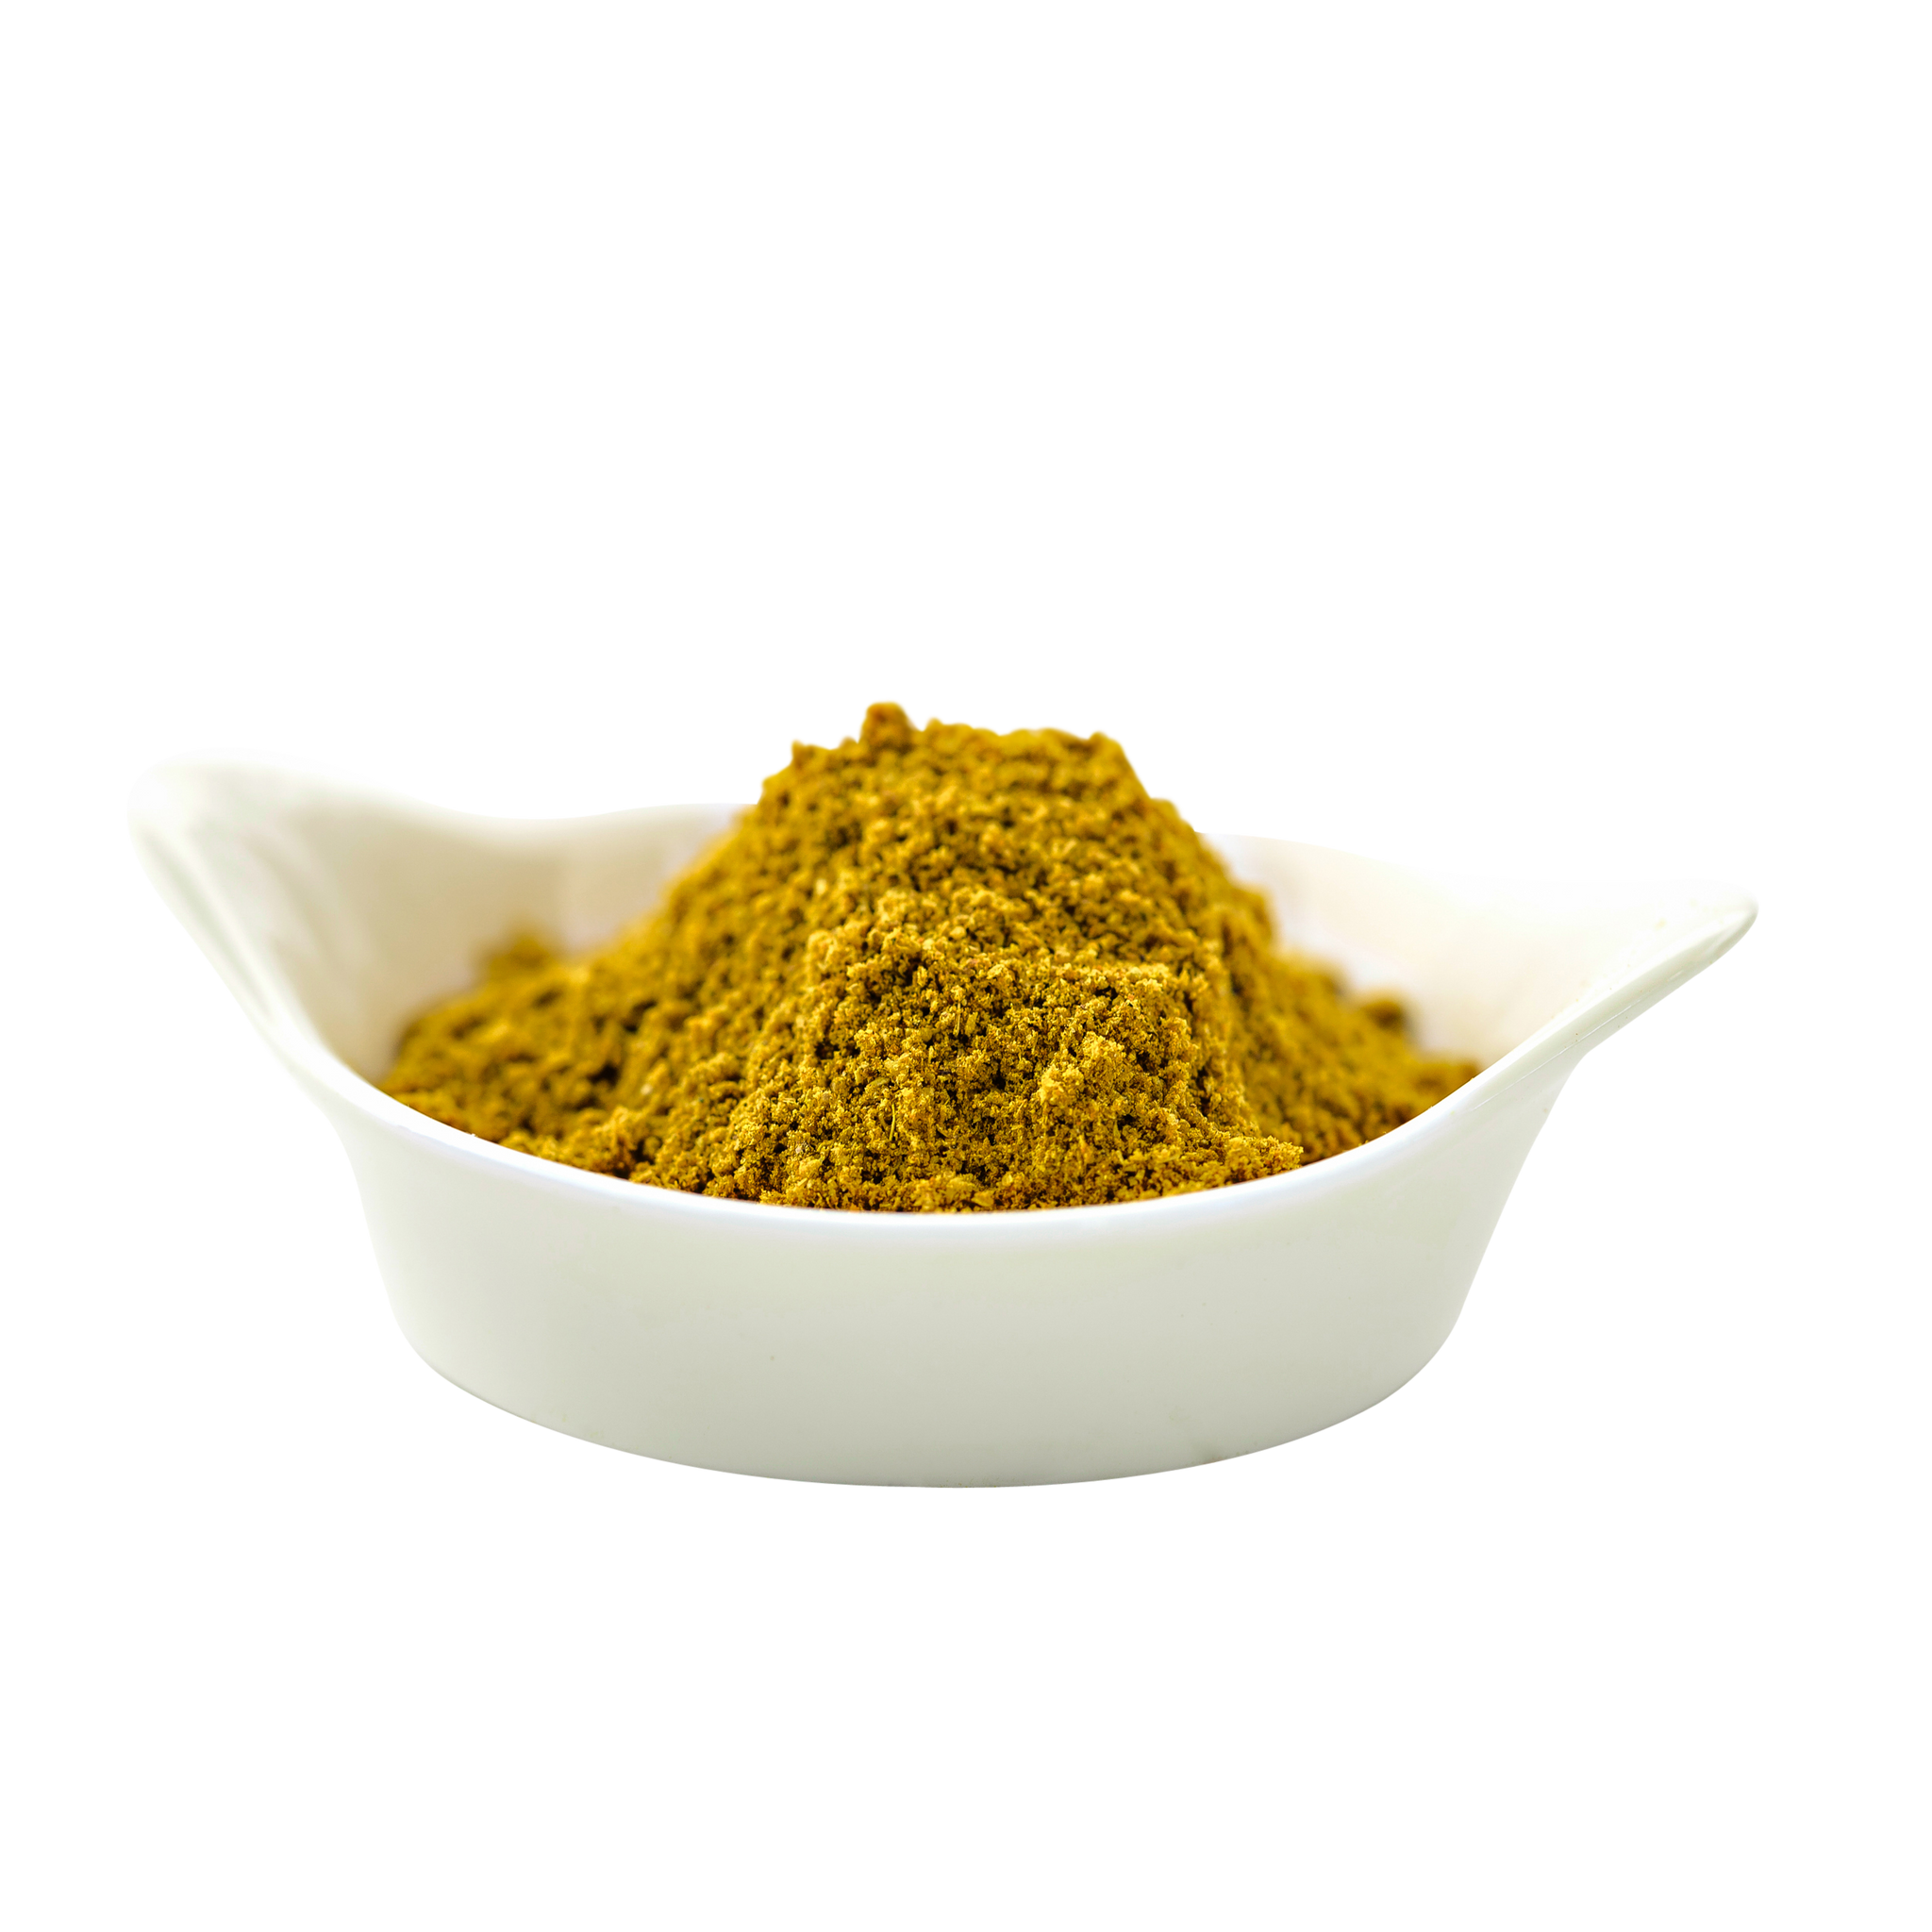 what is the purposes of curry powder